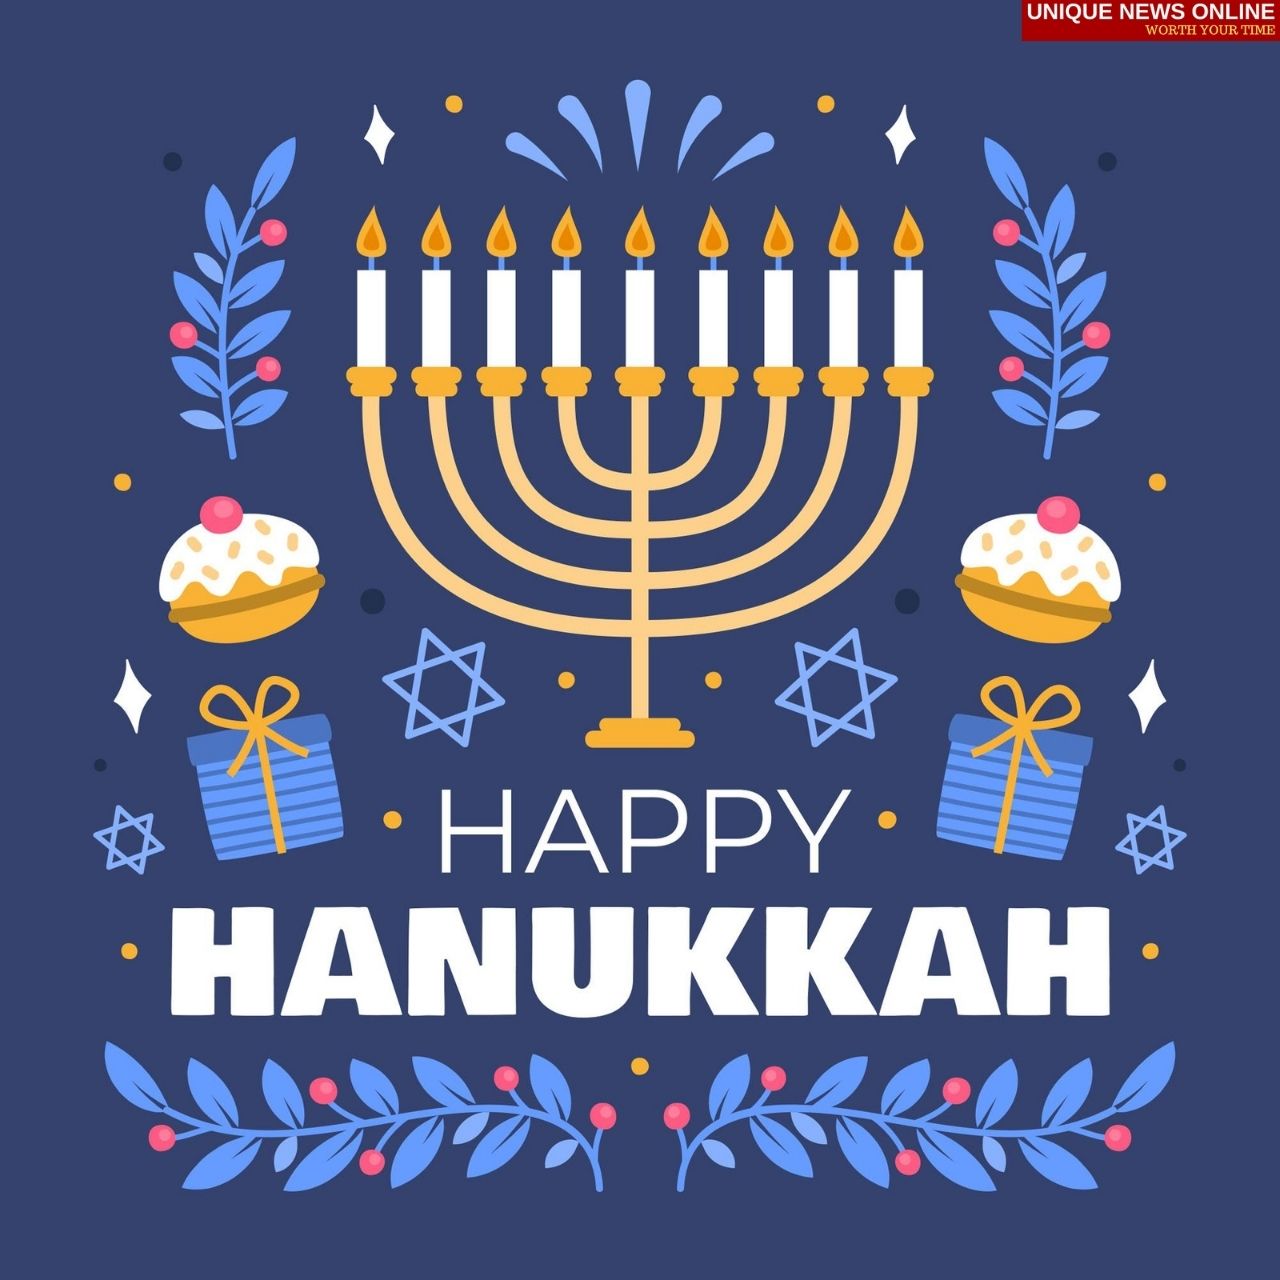 Happy Hanukkah 2021 Wishes, Quotes, Sayings, HD Images, Messages, and Greetings to Share